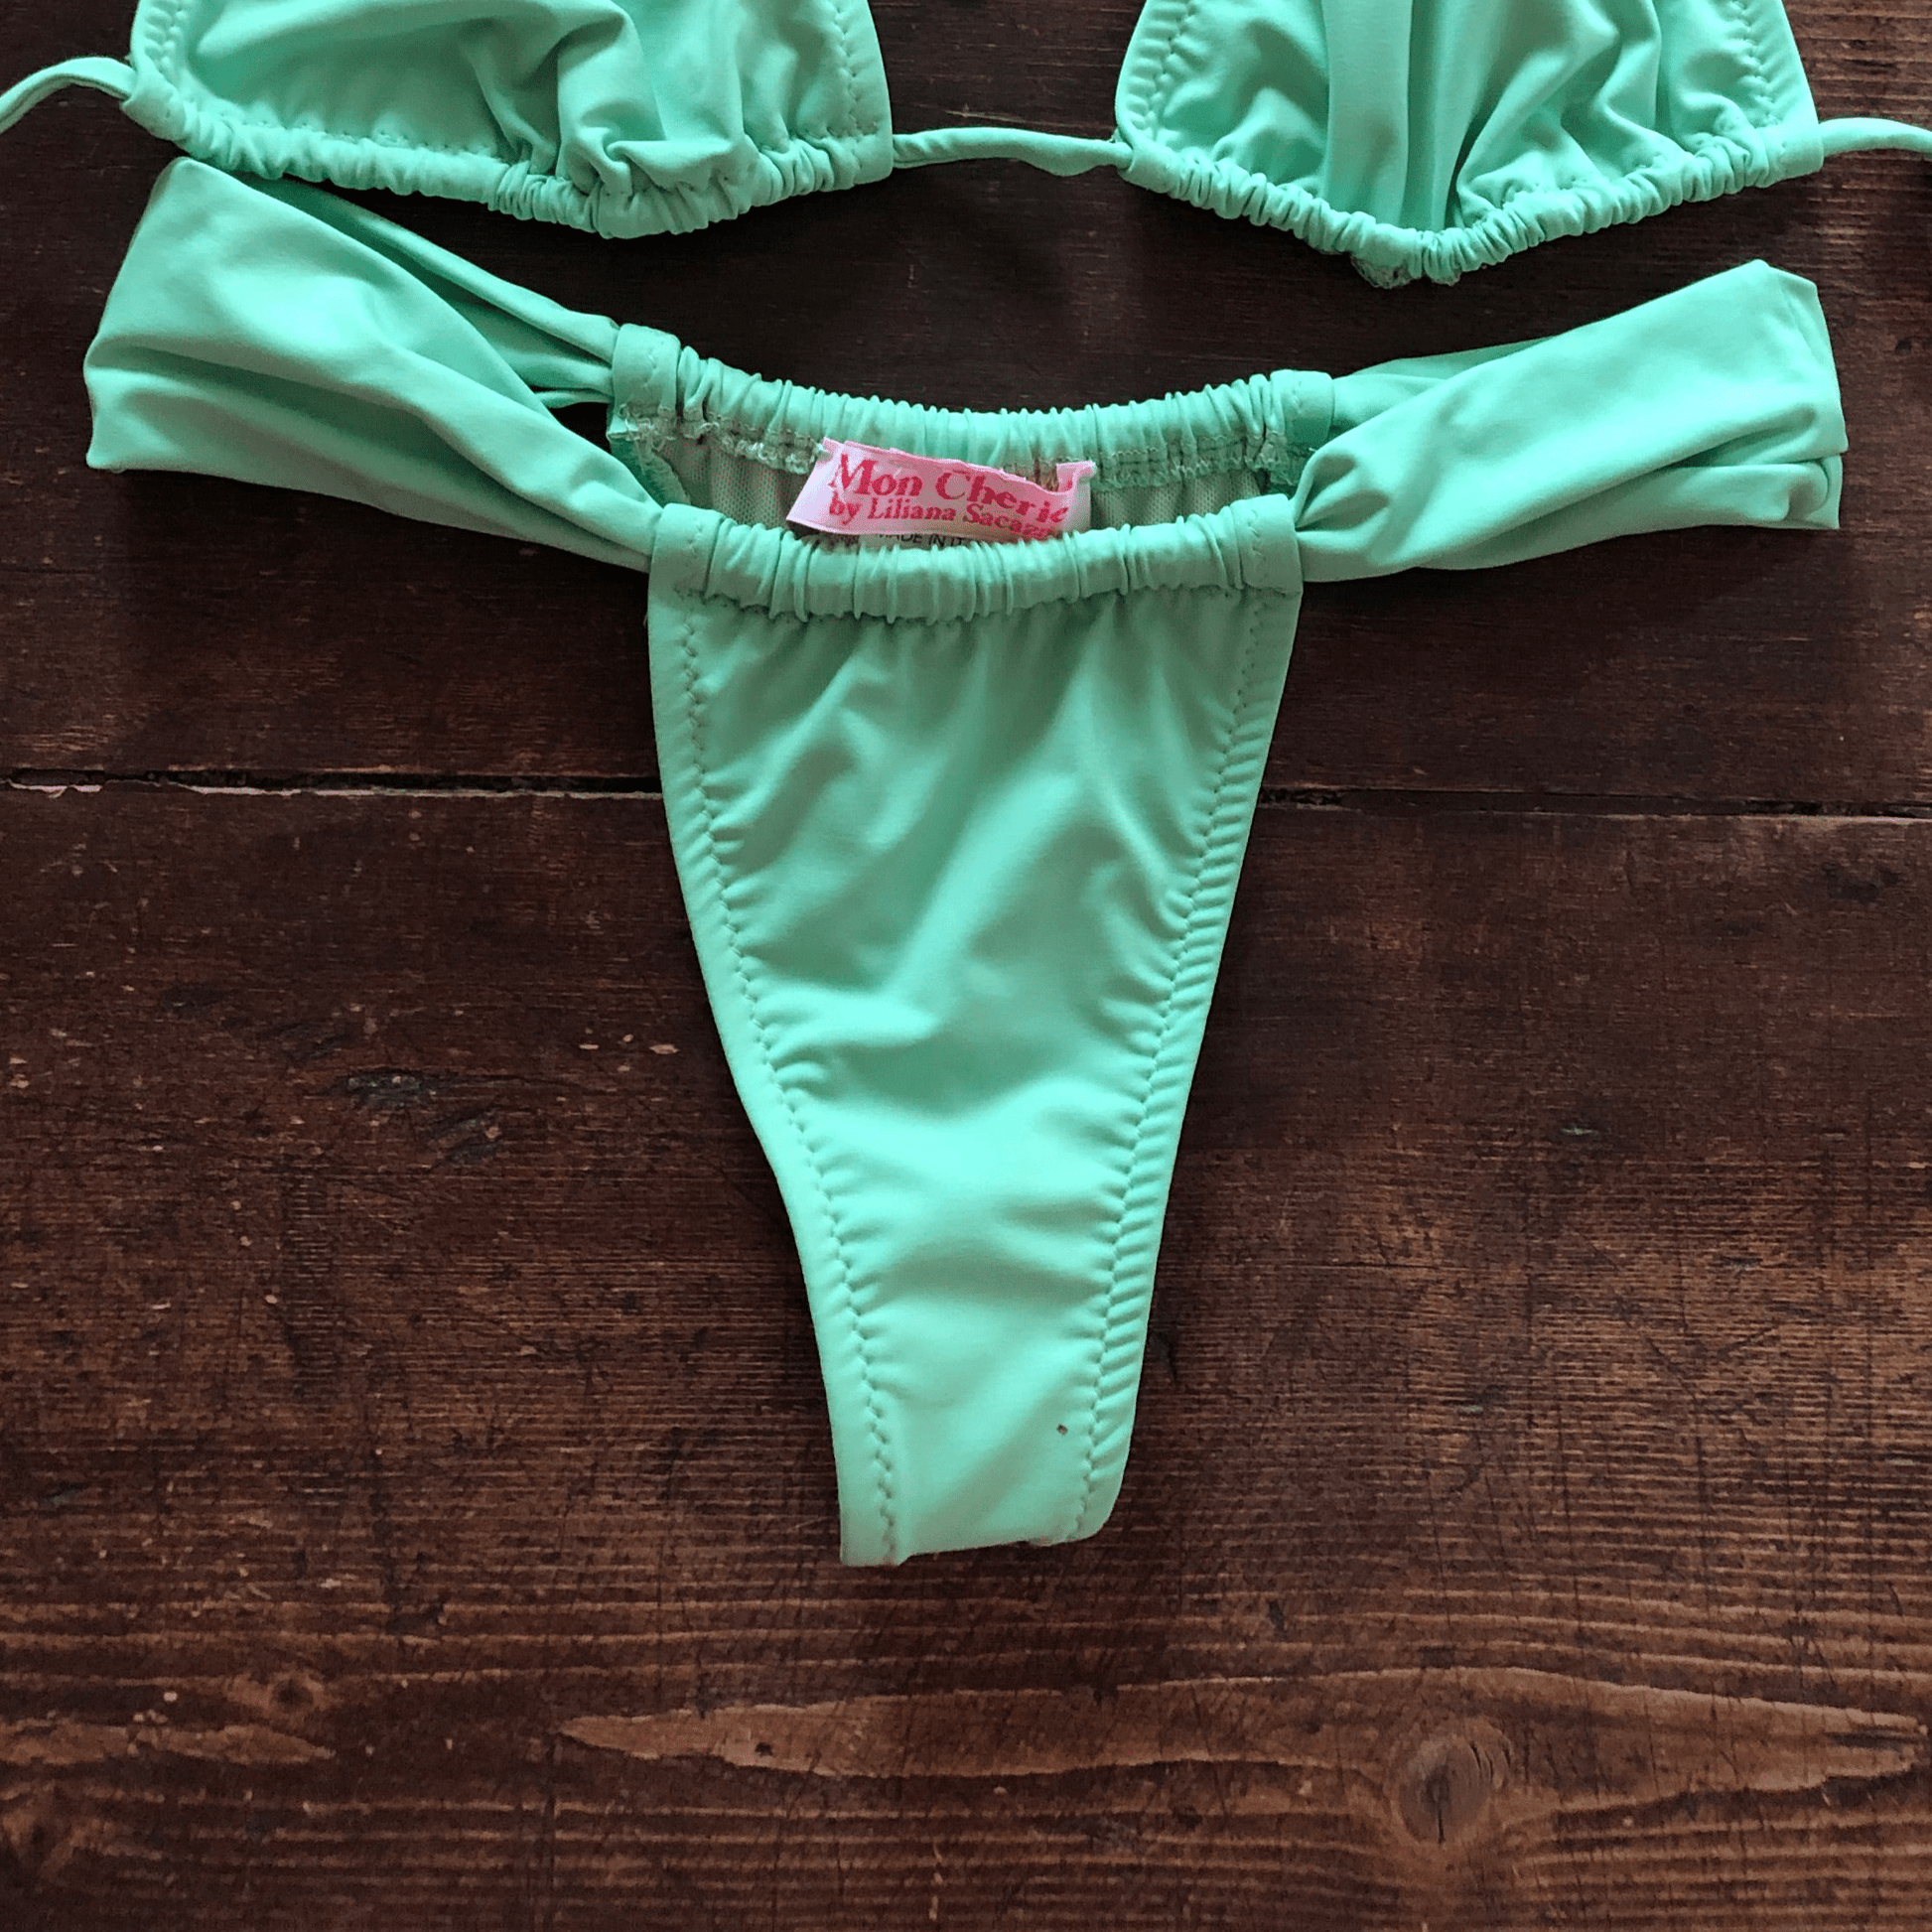 Arenas Ruched Bikini Bottoms | Available in Tie Side Cheeky Bikini Bottoms or Ruched Thong Bikini Bottoms - Premium high waisted bikini - Shop now at San Rocco Italia